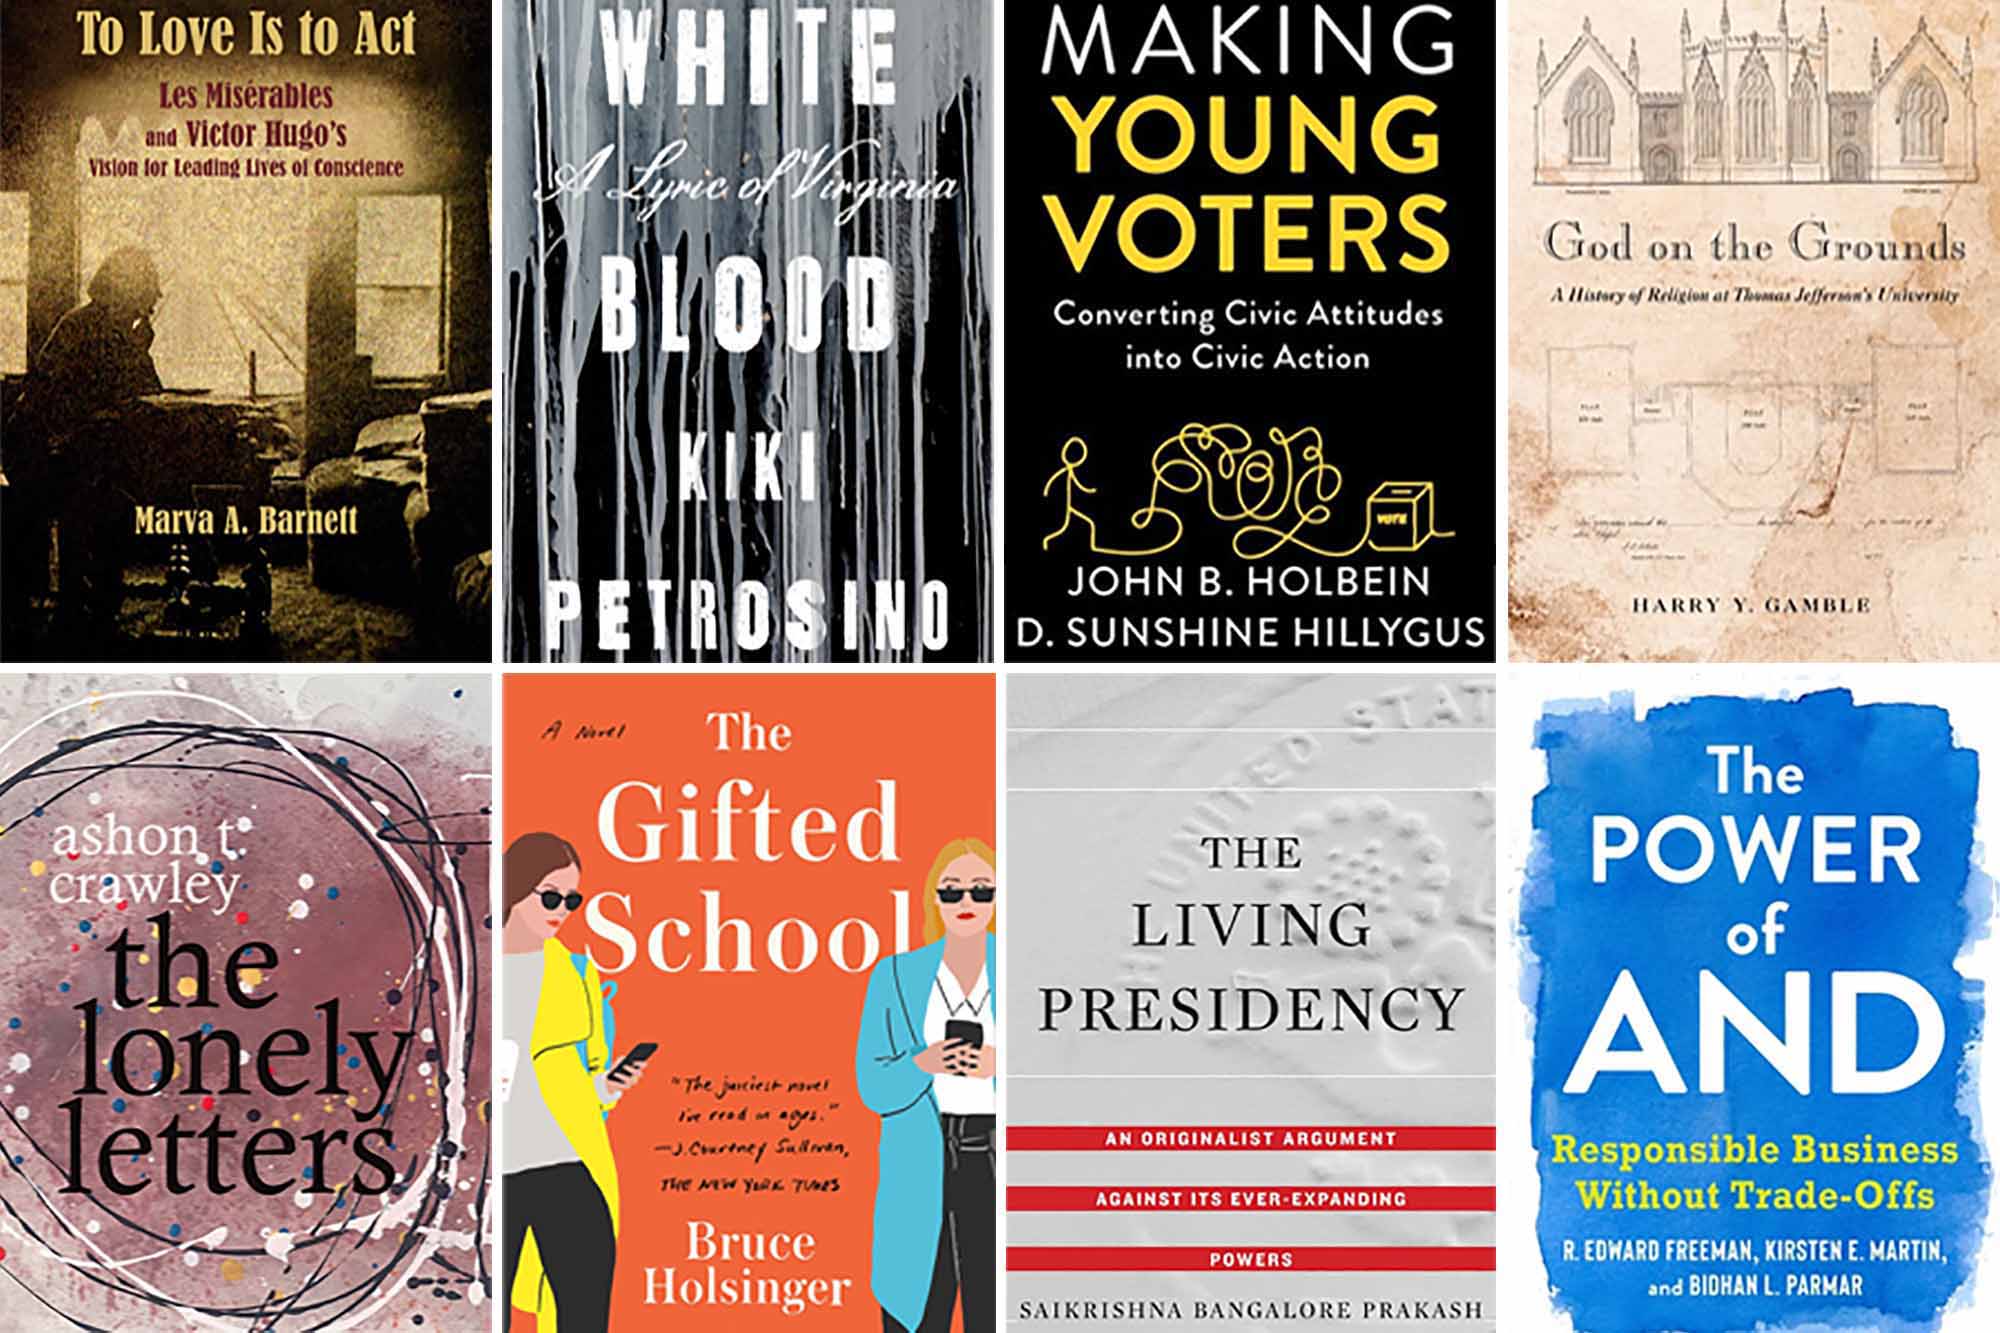 eight book covers left to right then down: To love is to act, White  blood, making young voters,  God on the Grounds, The lonely letters, the gifted school, the living presidency, the power of and responsible business without trade-offs